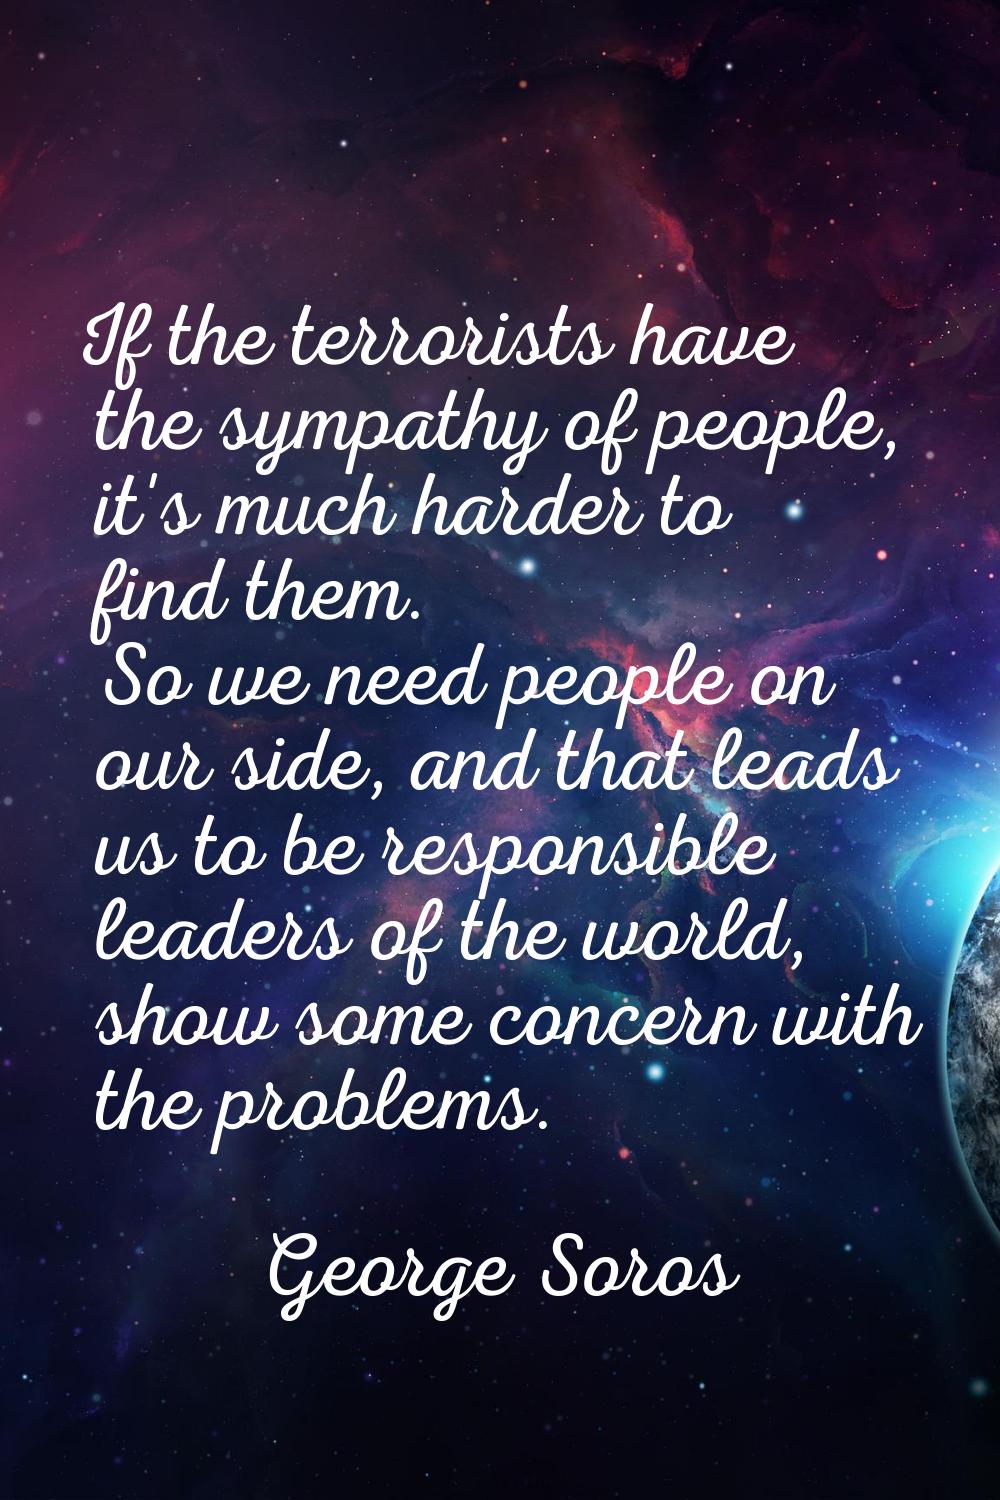 If the terrorists have the sympathy of people, it's much harder to find them. So we need people on 